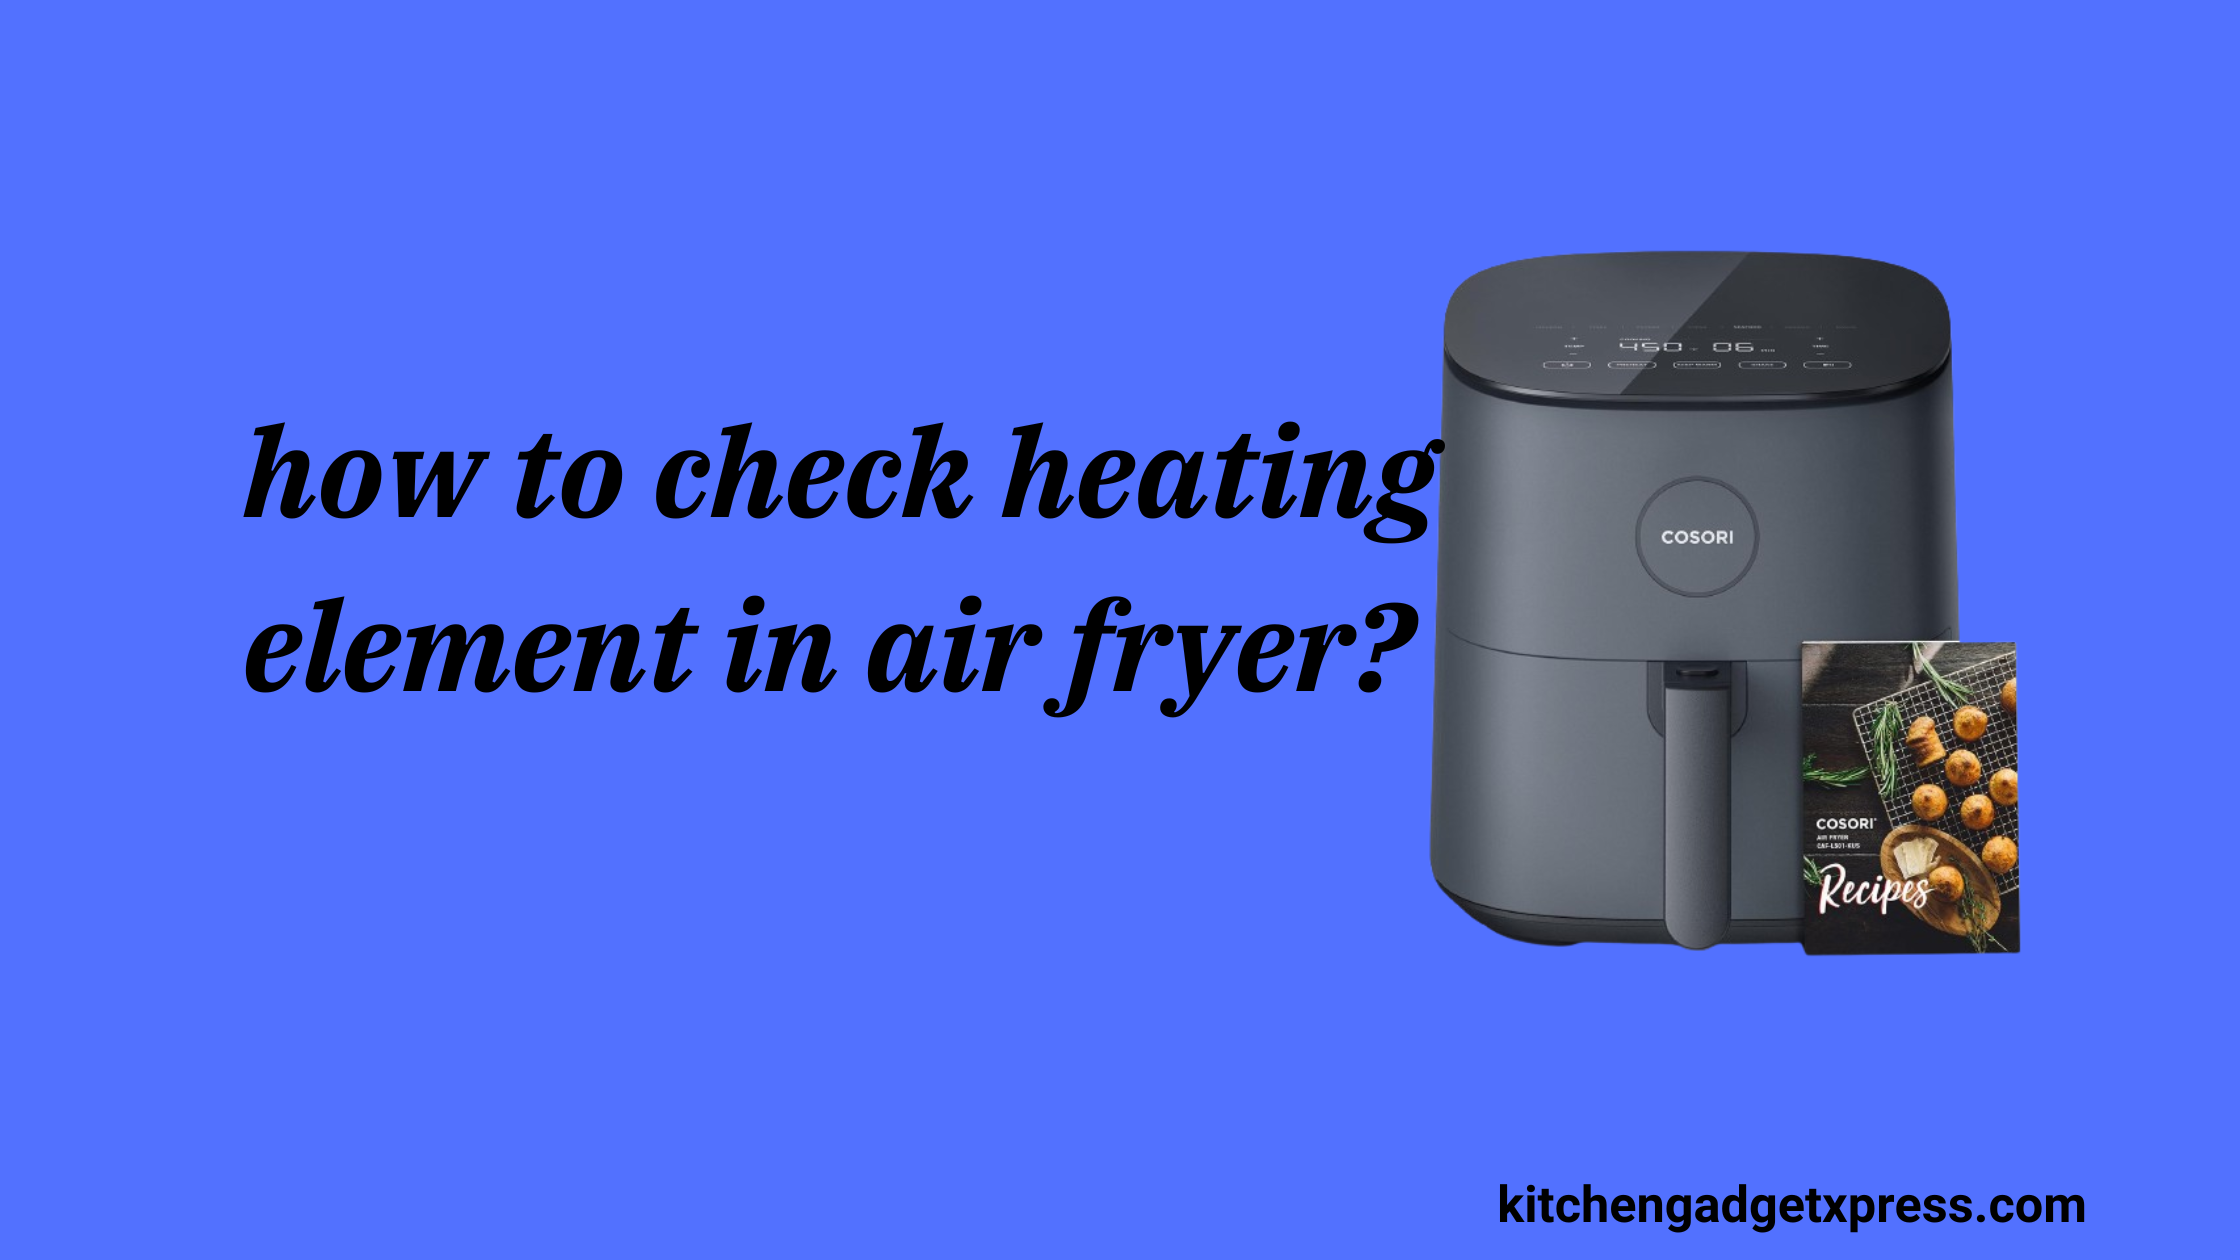 how to check heating element in air fryer?